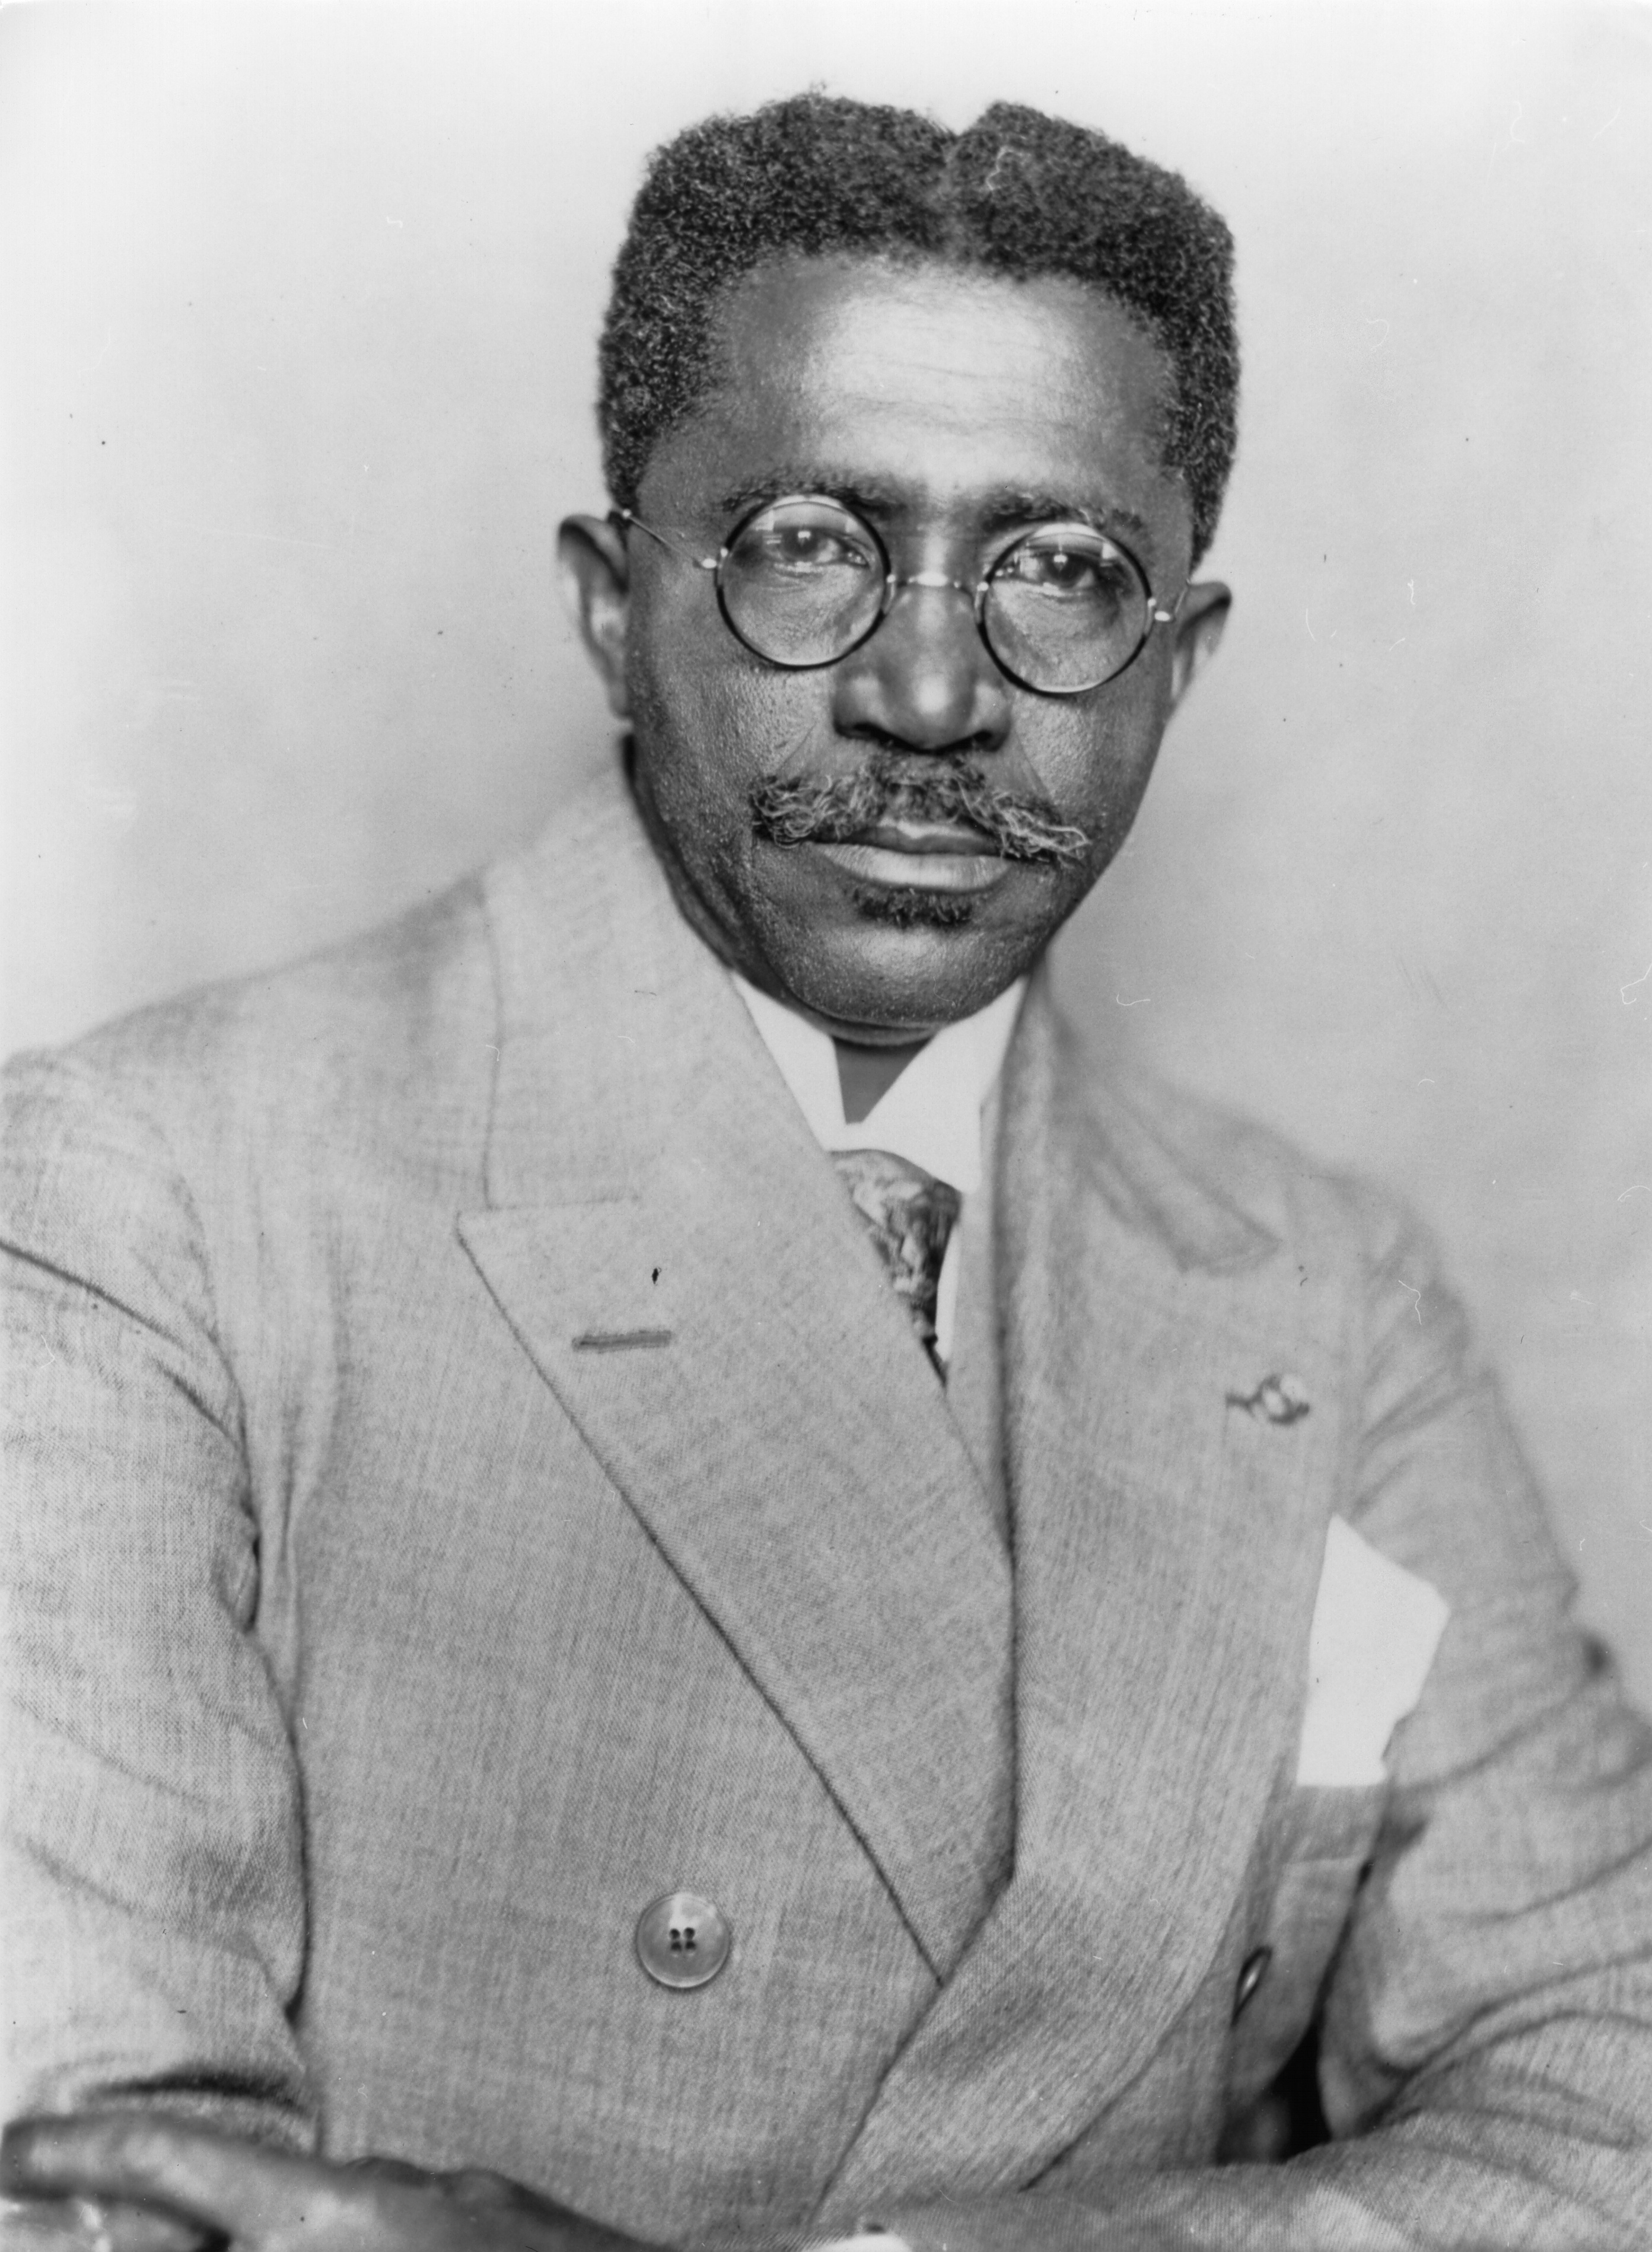 Charles D.B. King sitting for a photography portrait in a sharp linen suit and round glasses